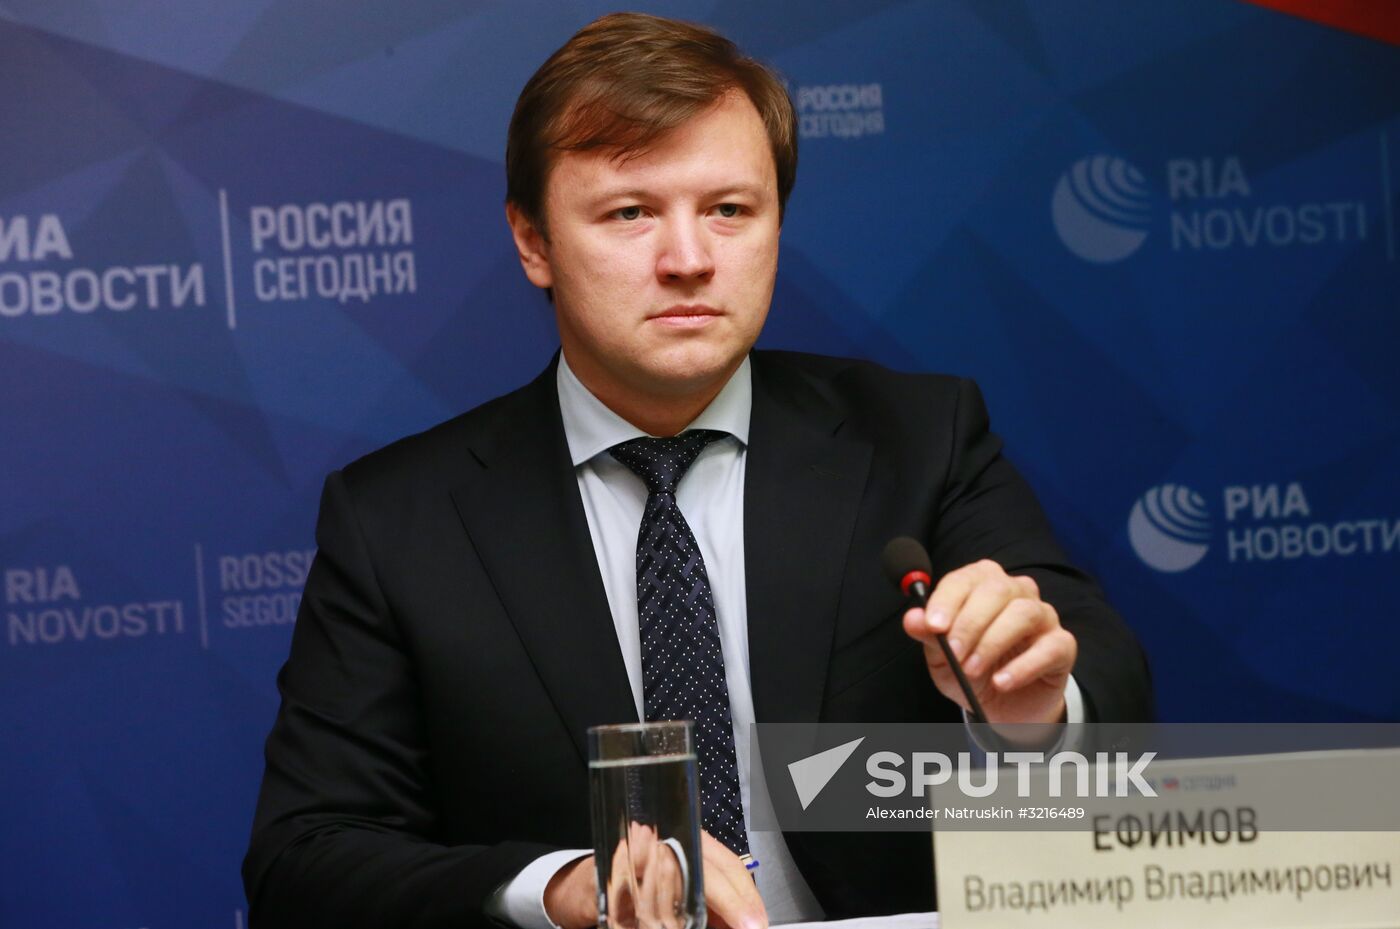 News conference "Moscow economy's drivers: yesterday, today and tomorrow"